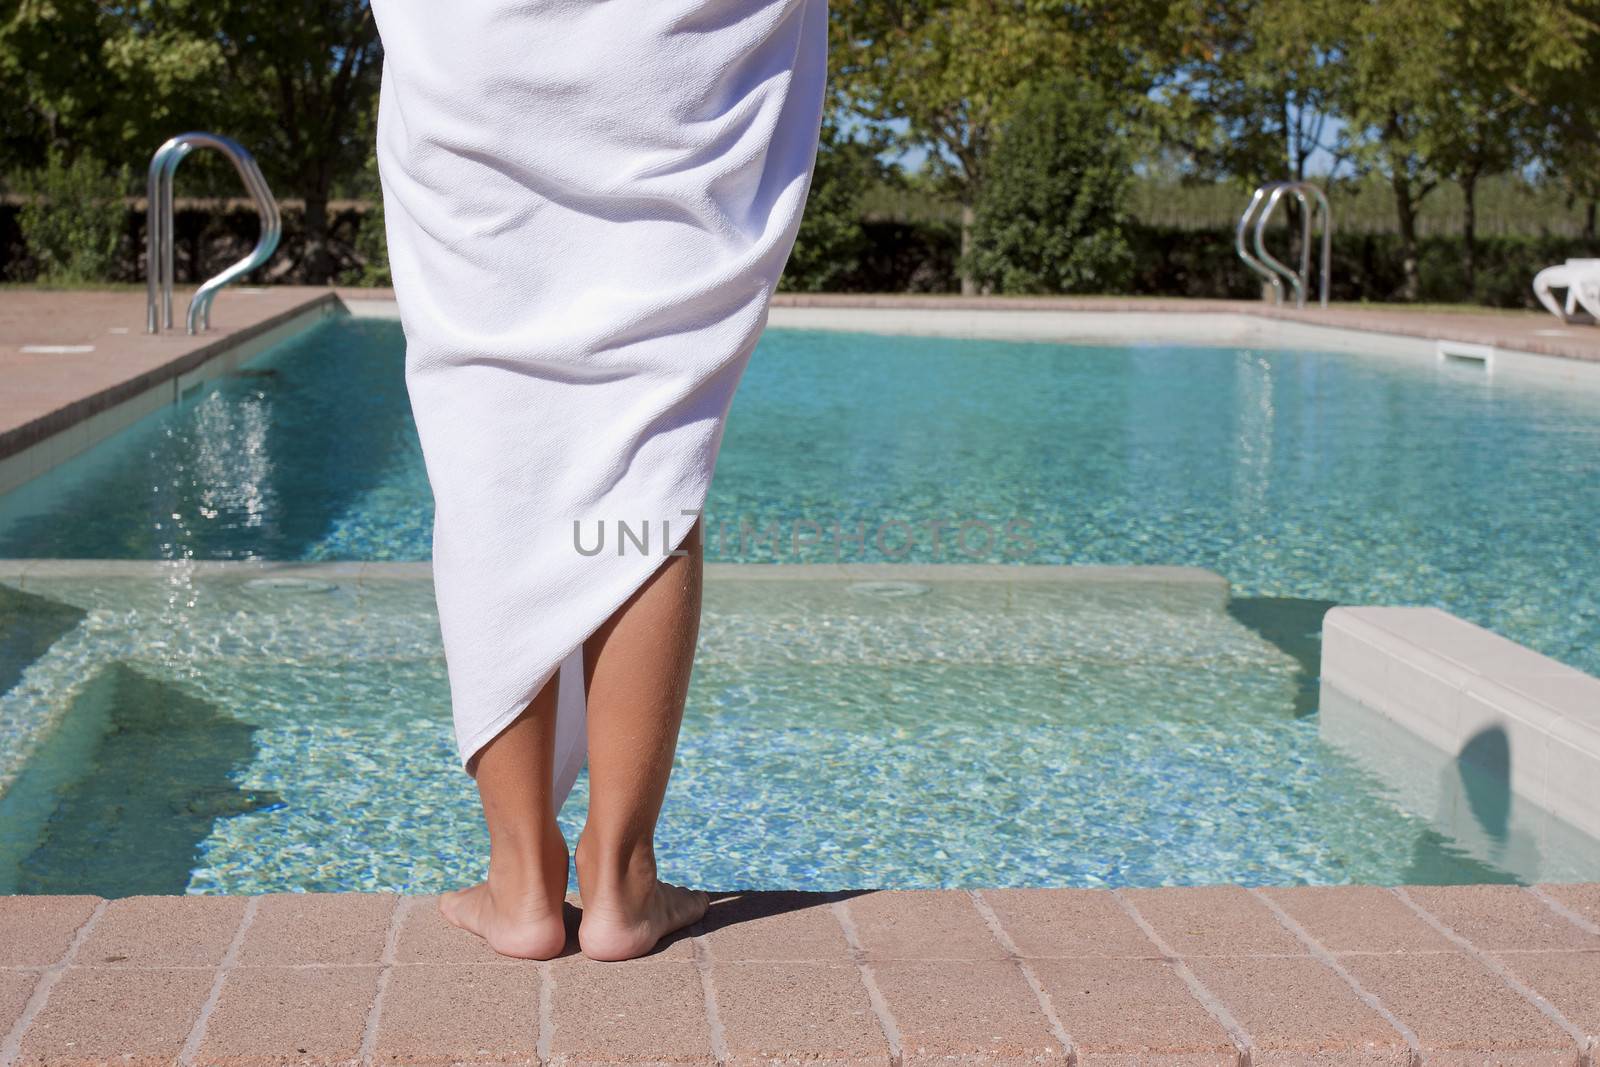 A person wrapped up in a towel standing with back to camera looking at an empty swimming pool